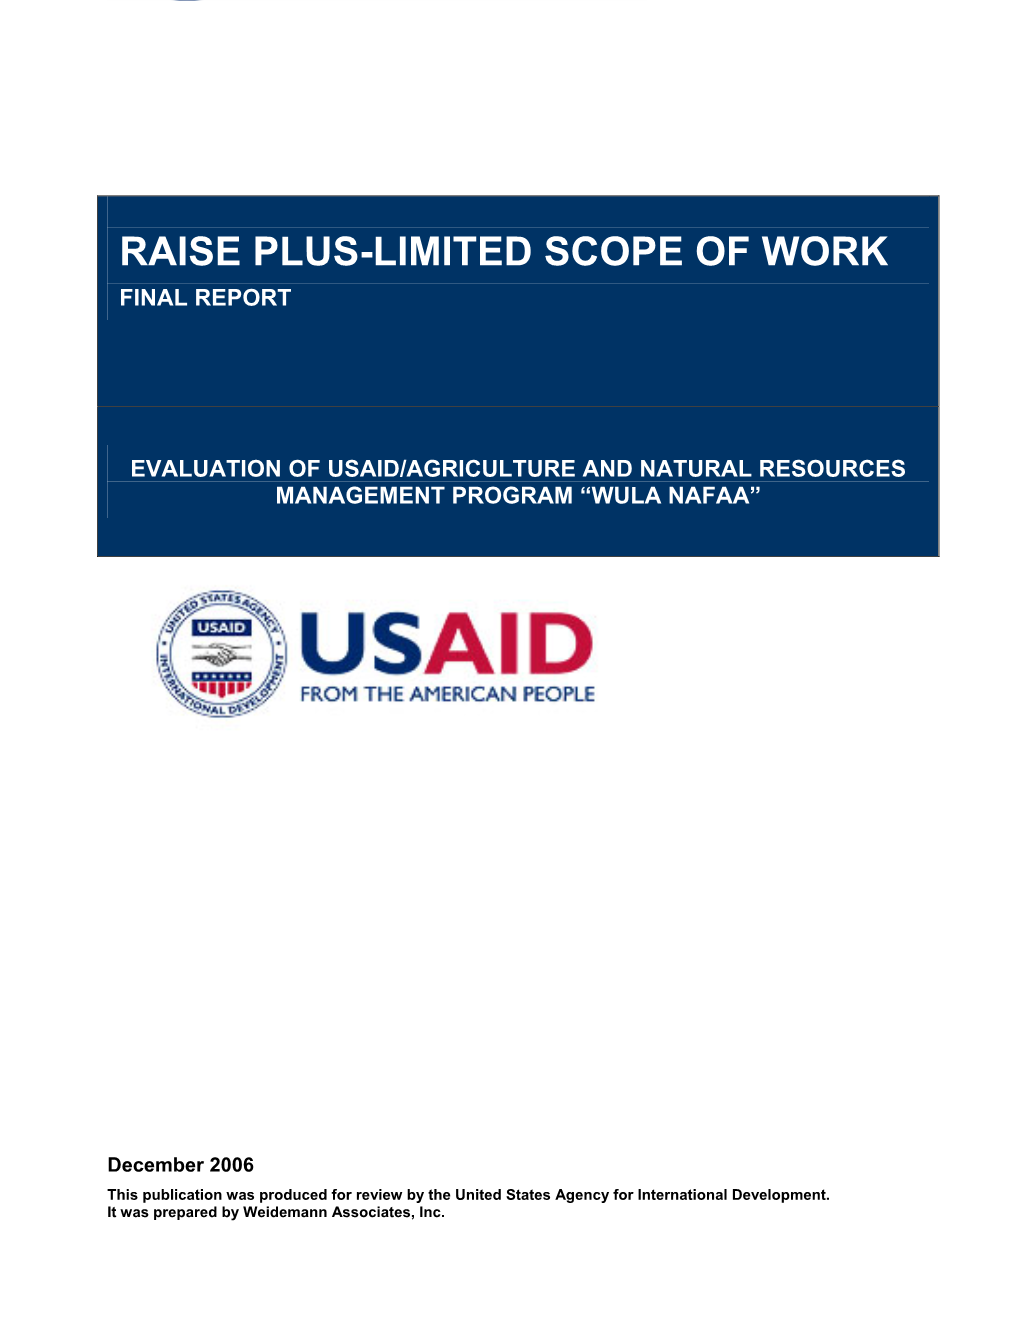 Raise Plus-Limited Scope of Work Final Report